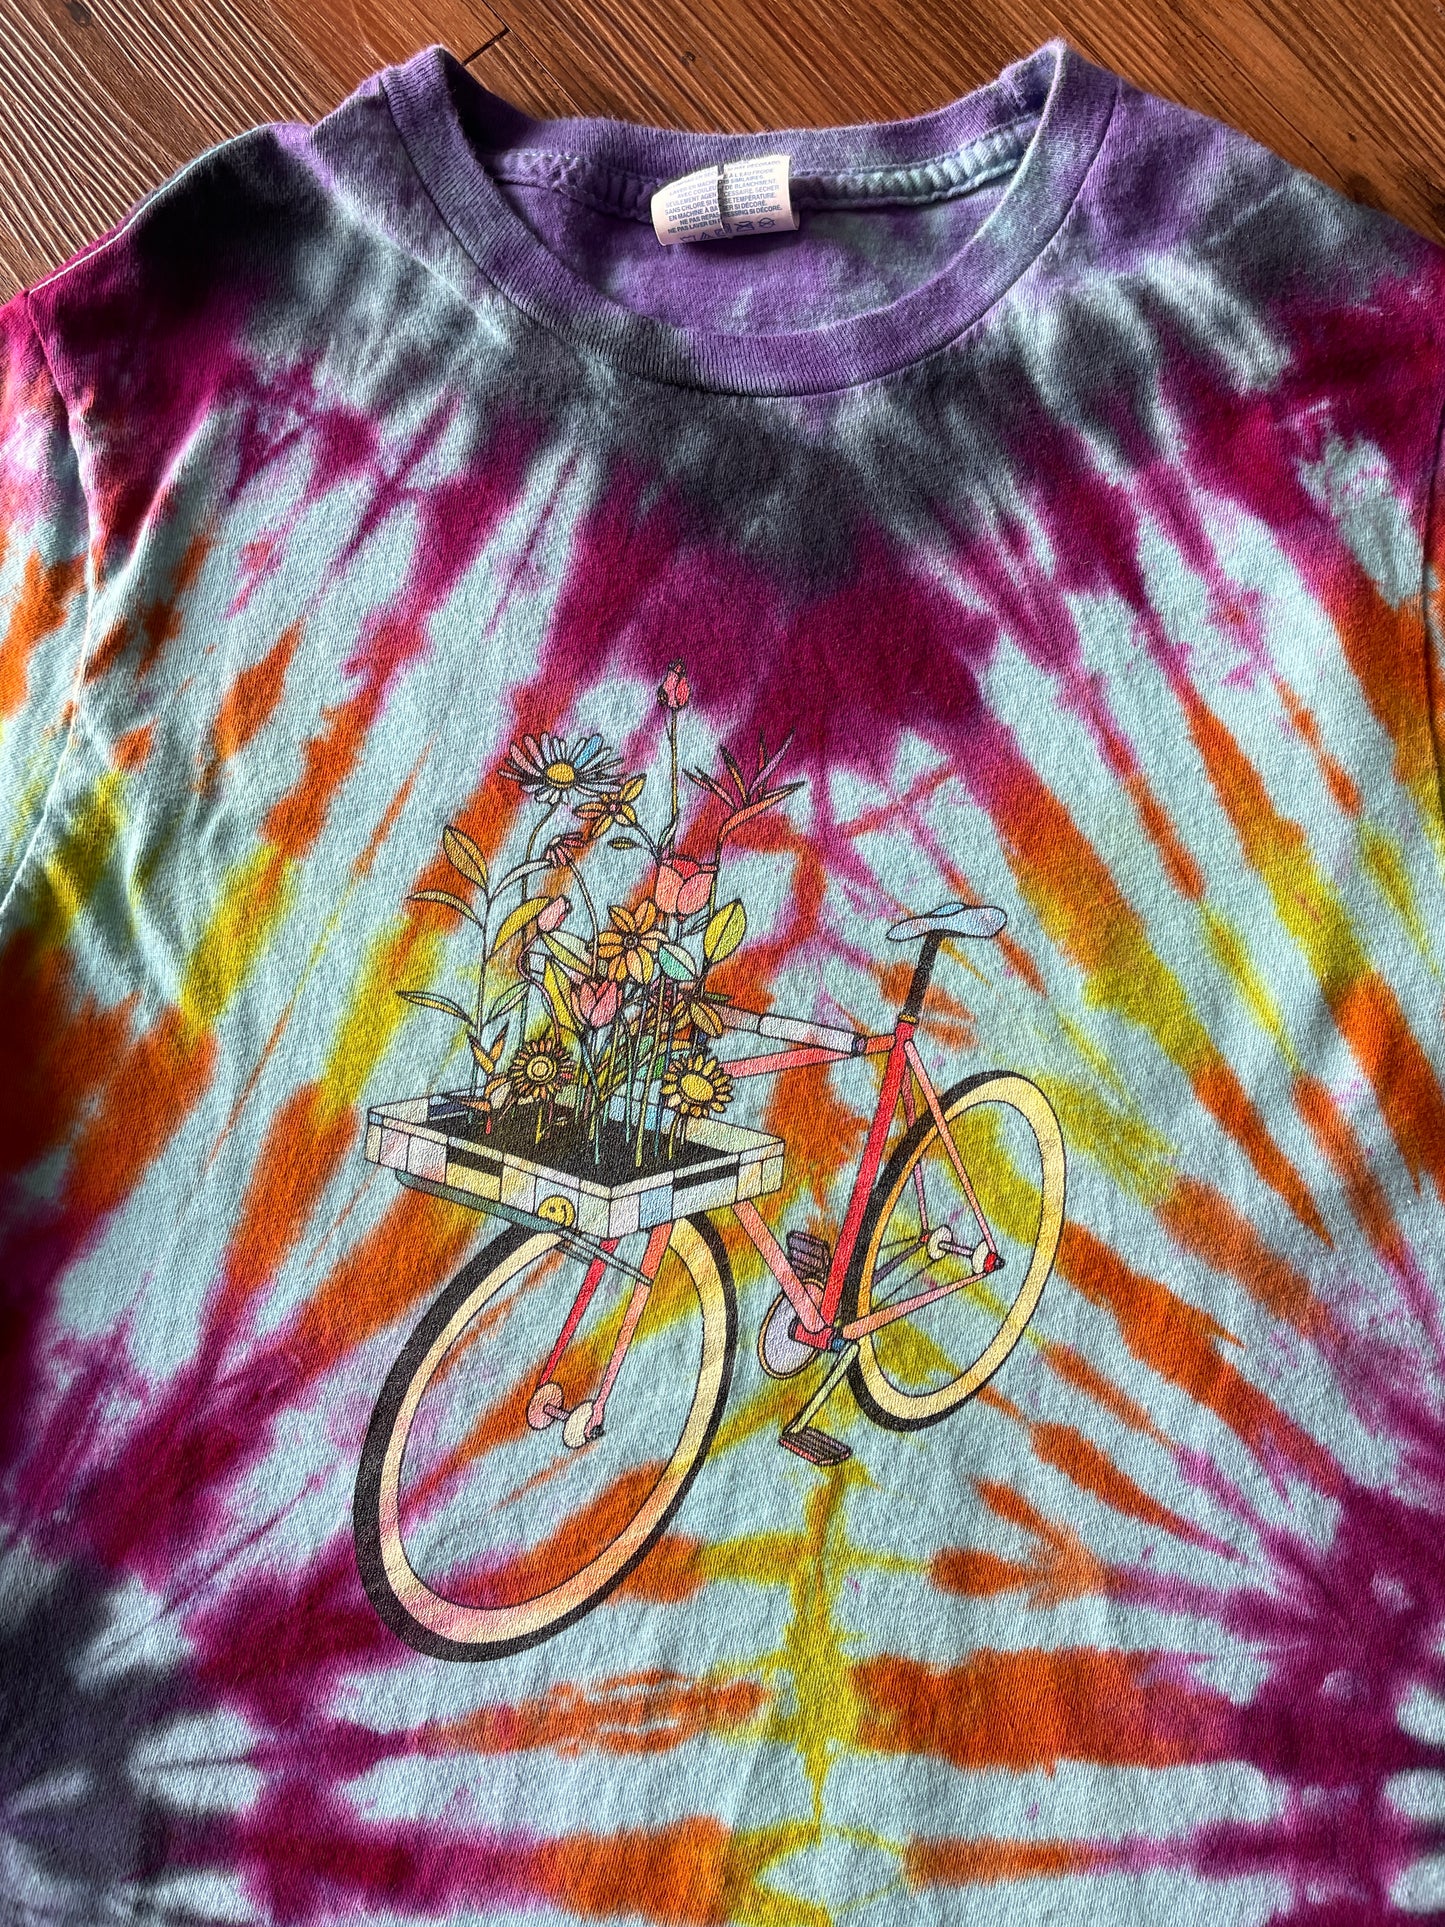 Small Women’s Floral Bicycle Handmade Reverse Tie Dye T-Shirt | Blue, Pink, and Orange Pleated Tie Dye Short Sleeve